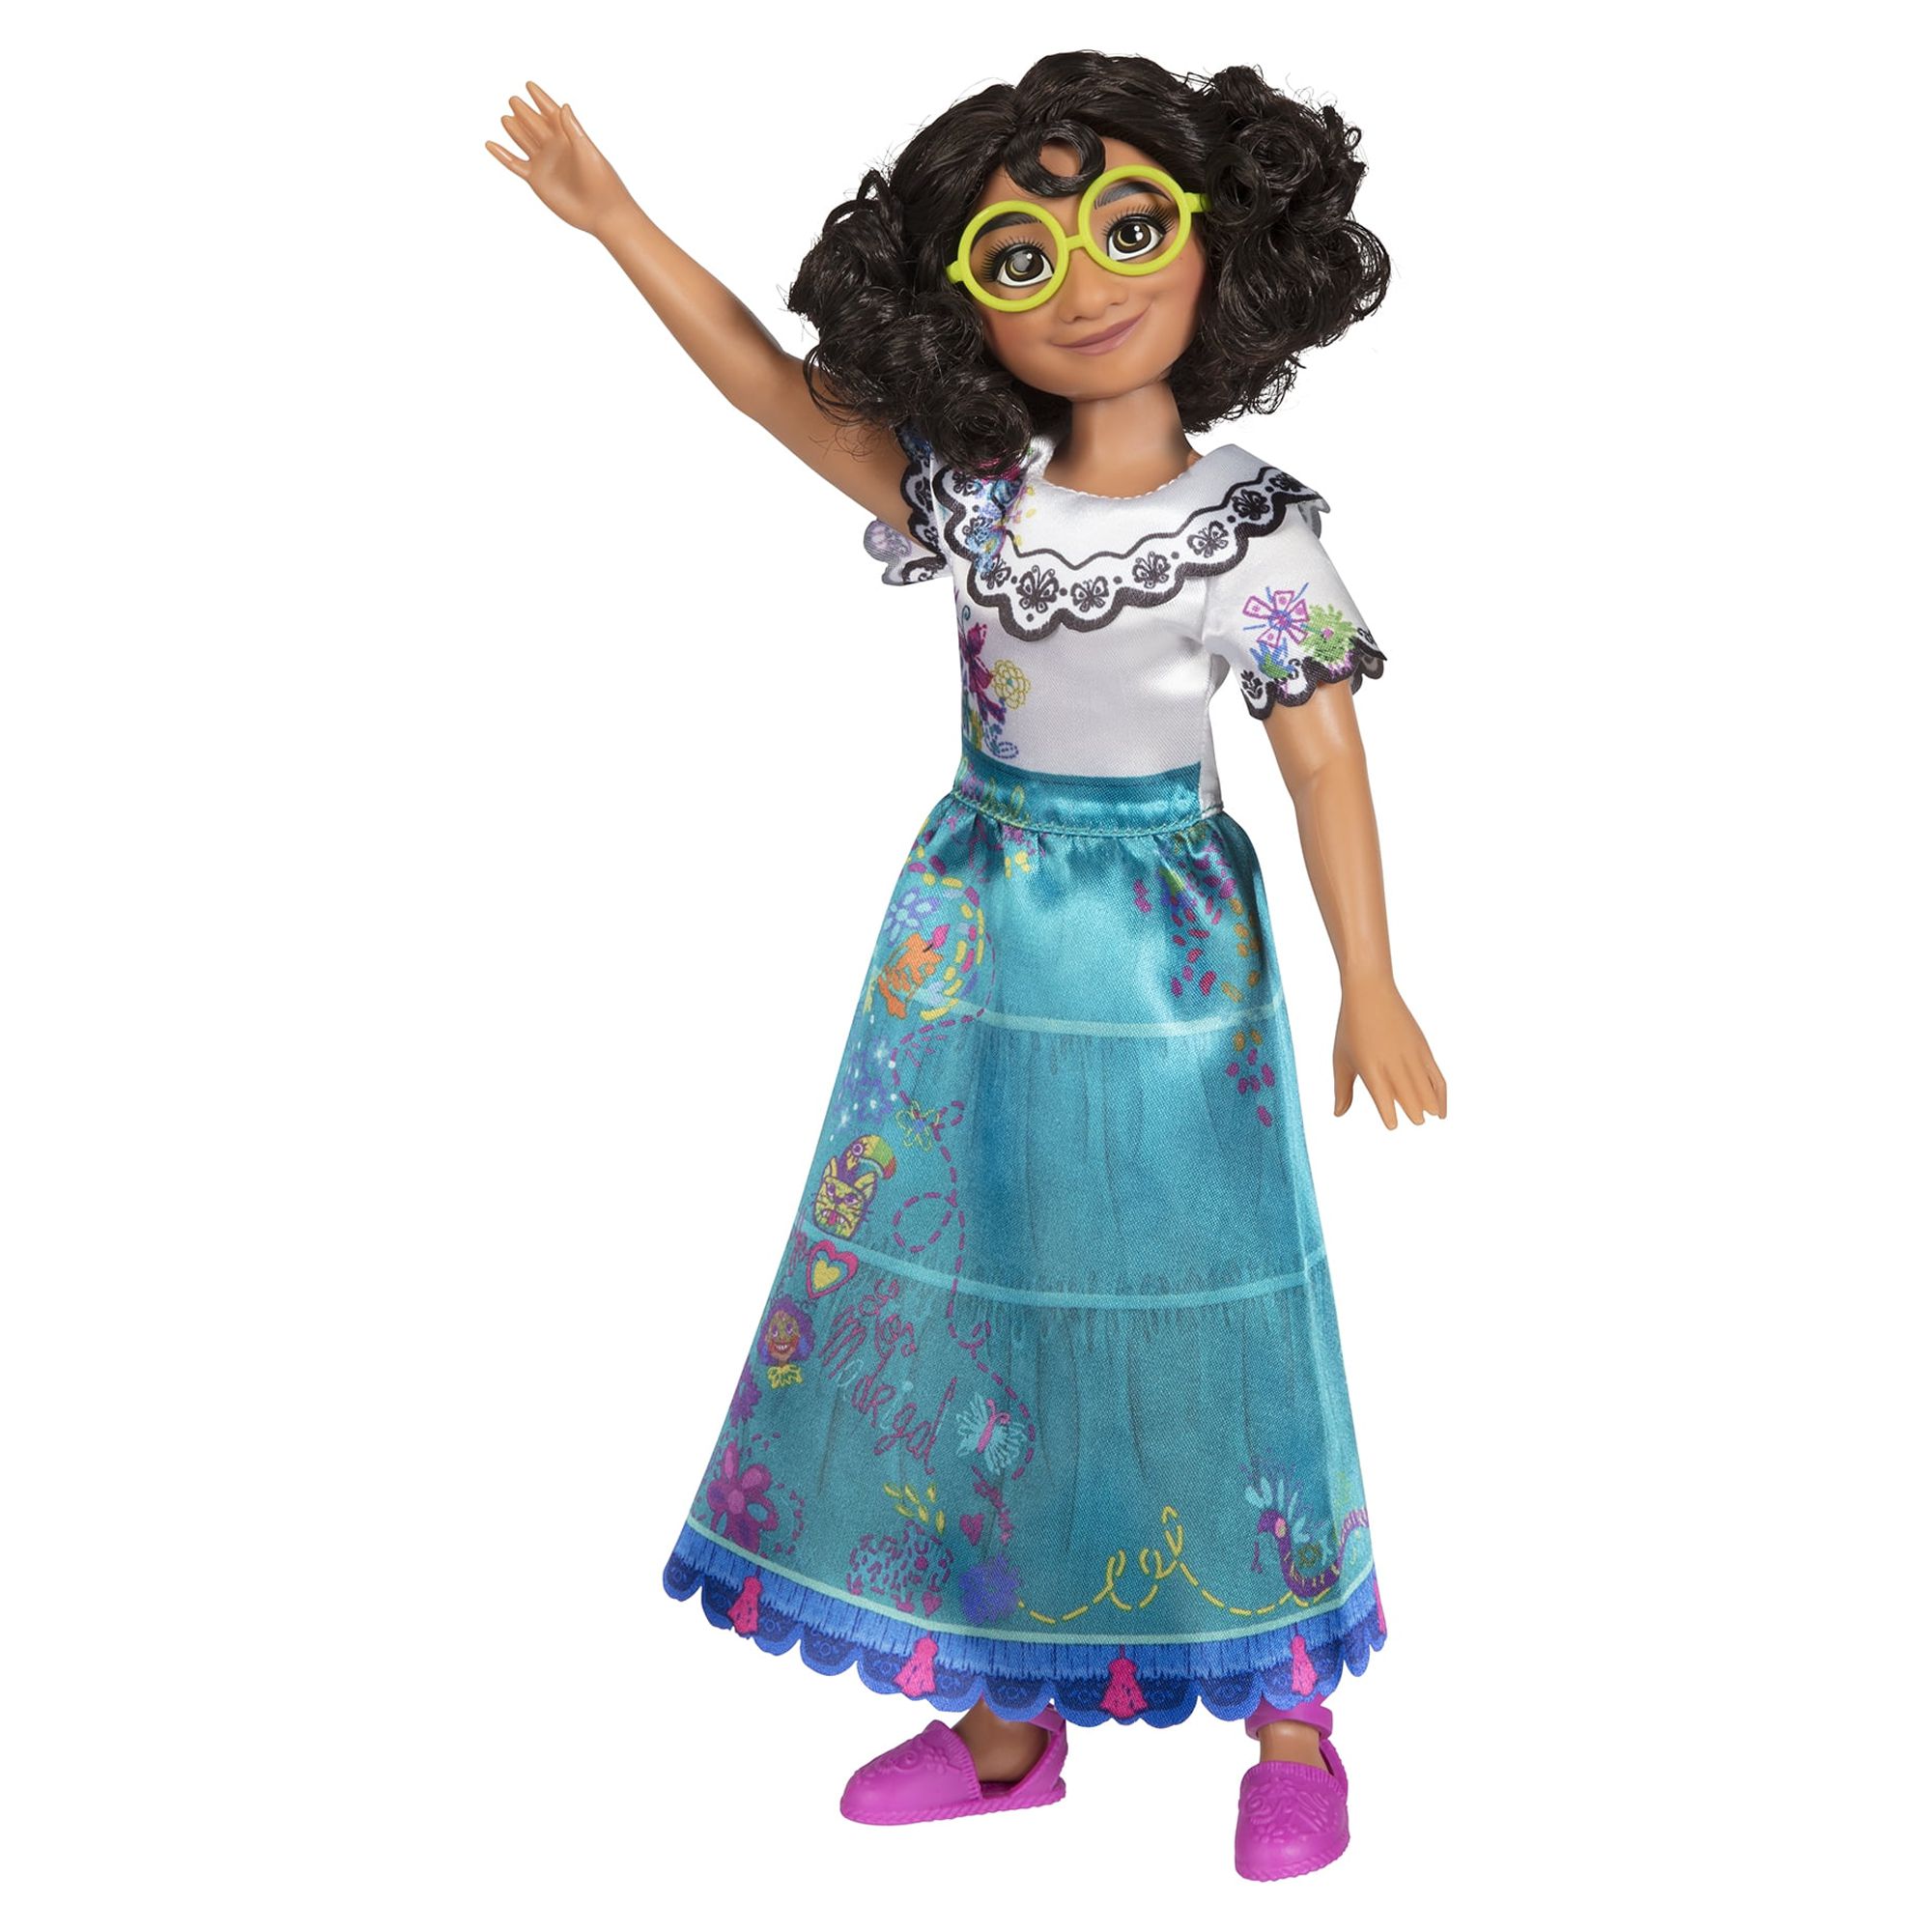 Disney Encanto Mirabel 11 inch Fashion Doll Includes Dress, Shoes and Clip, for Children Ages 3+ - image 2 of 6